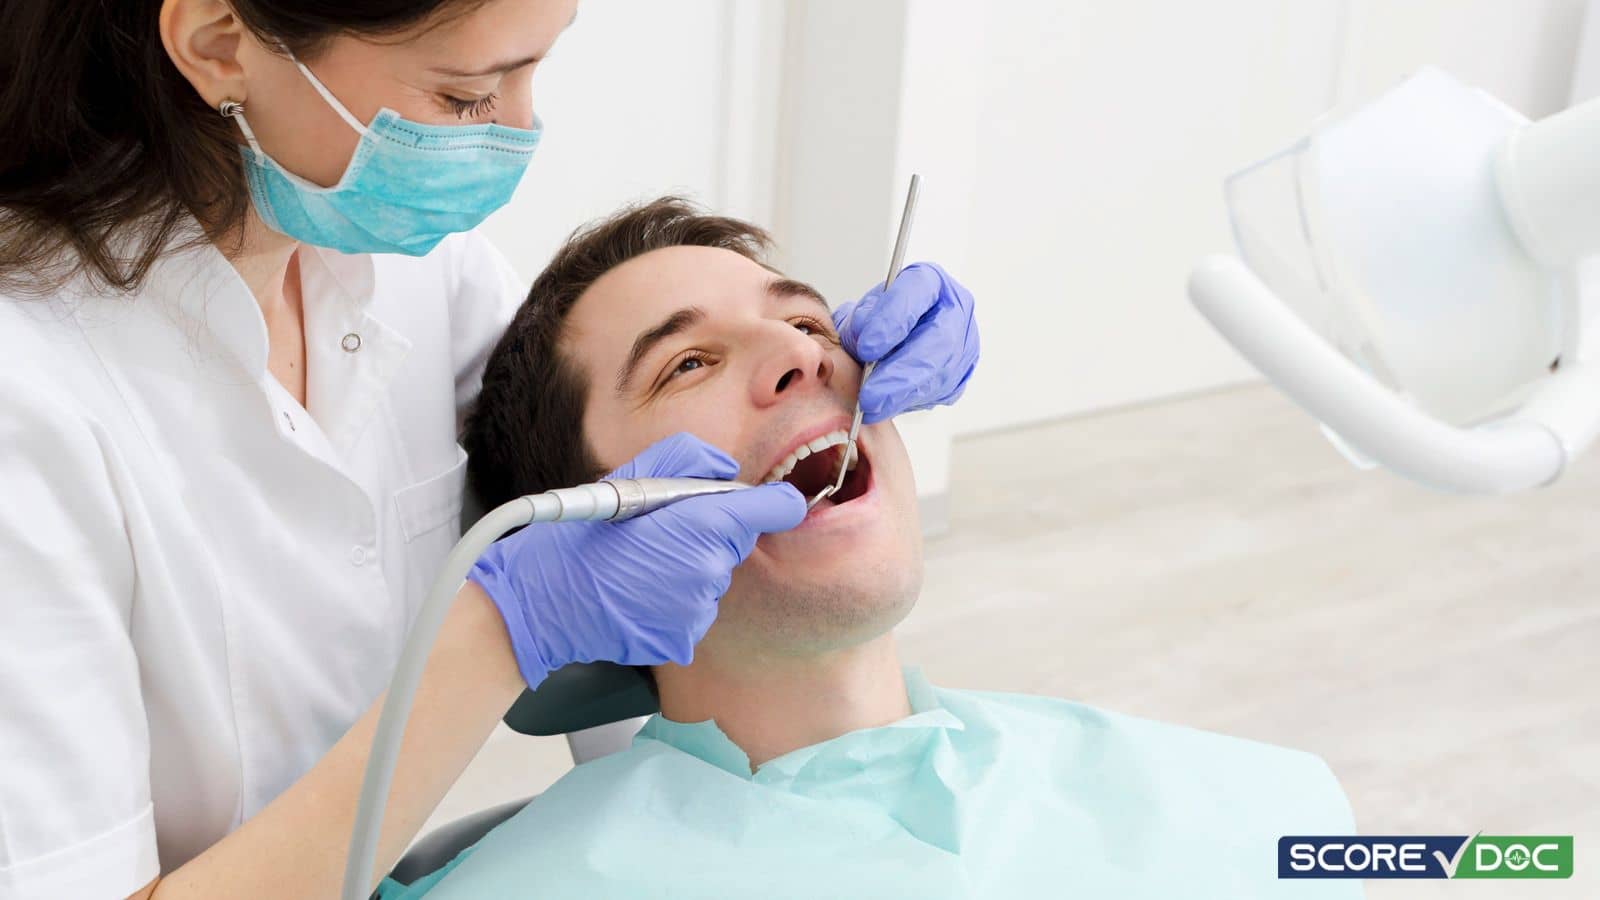 Top-Rated Dental Clinics in and Around Stratford, NJ